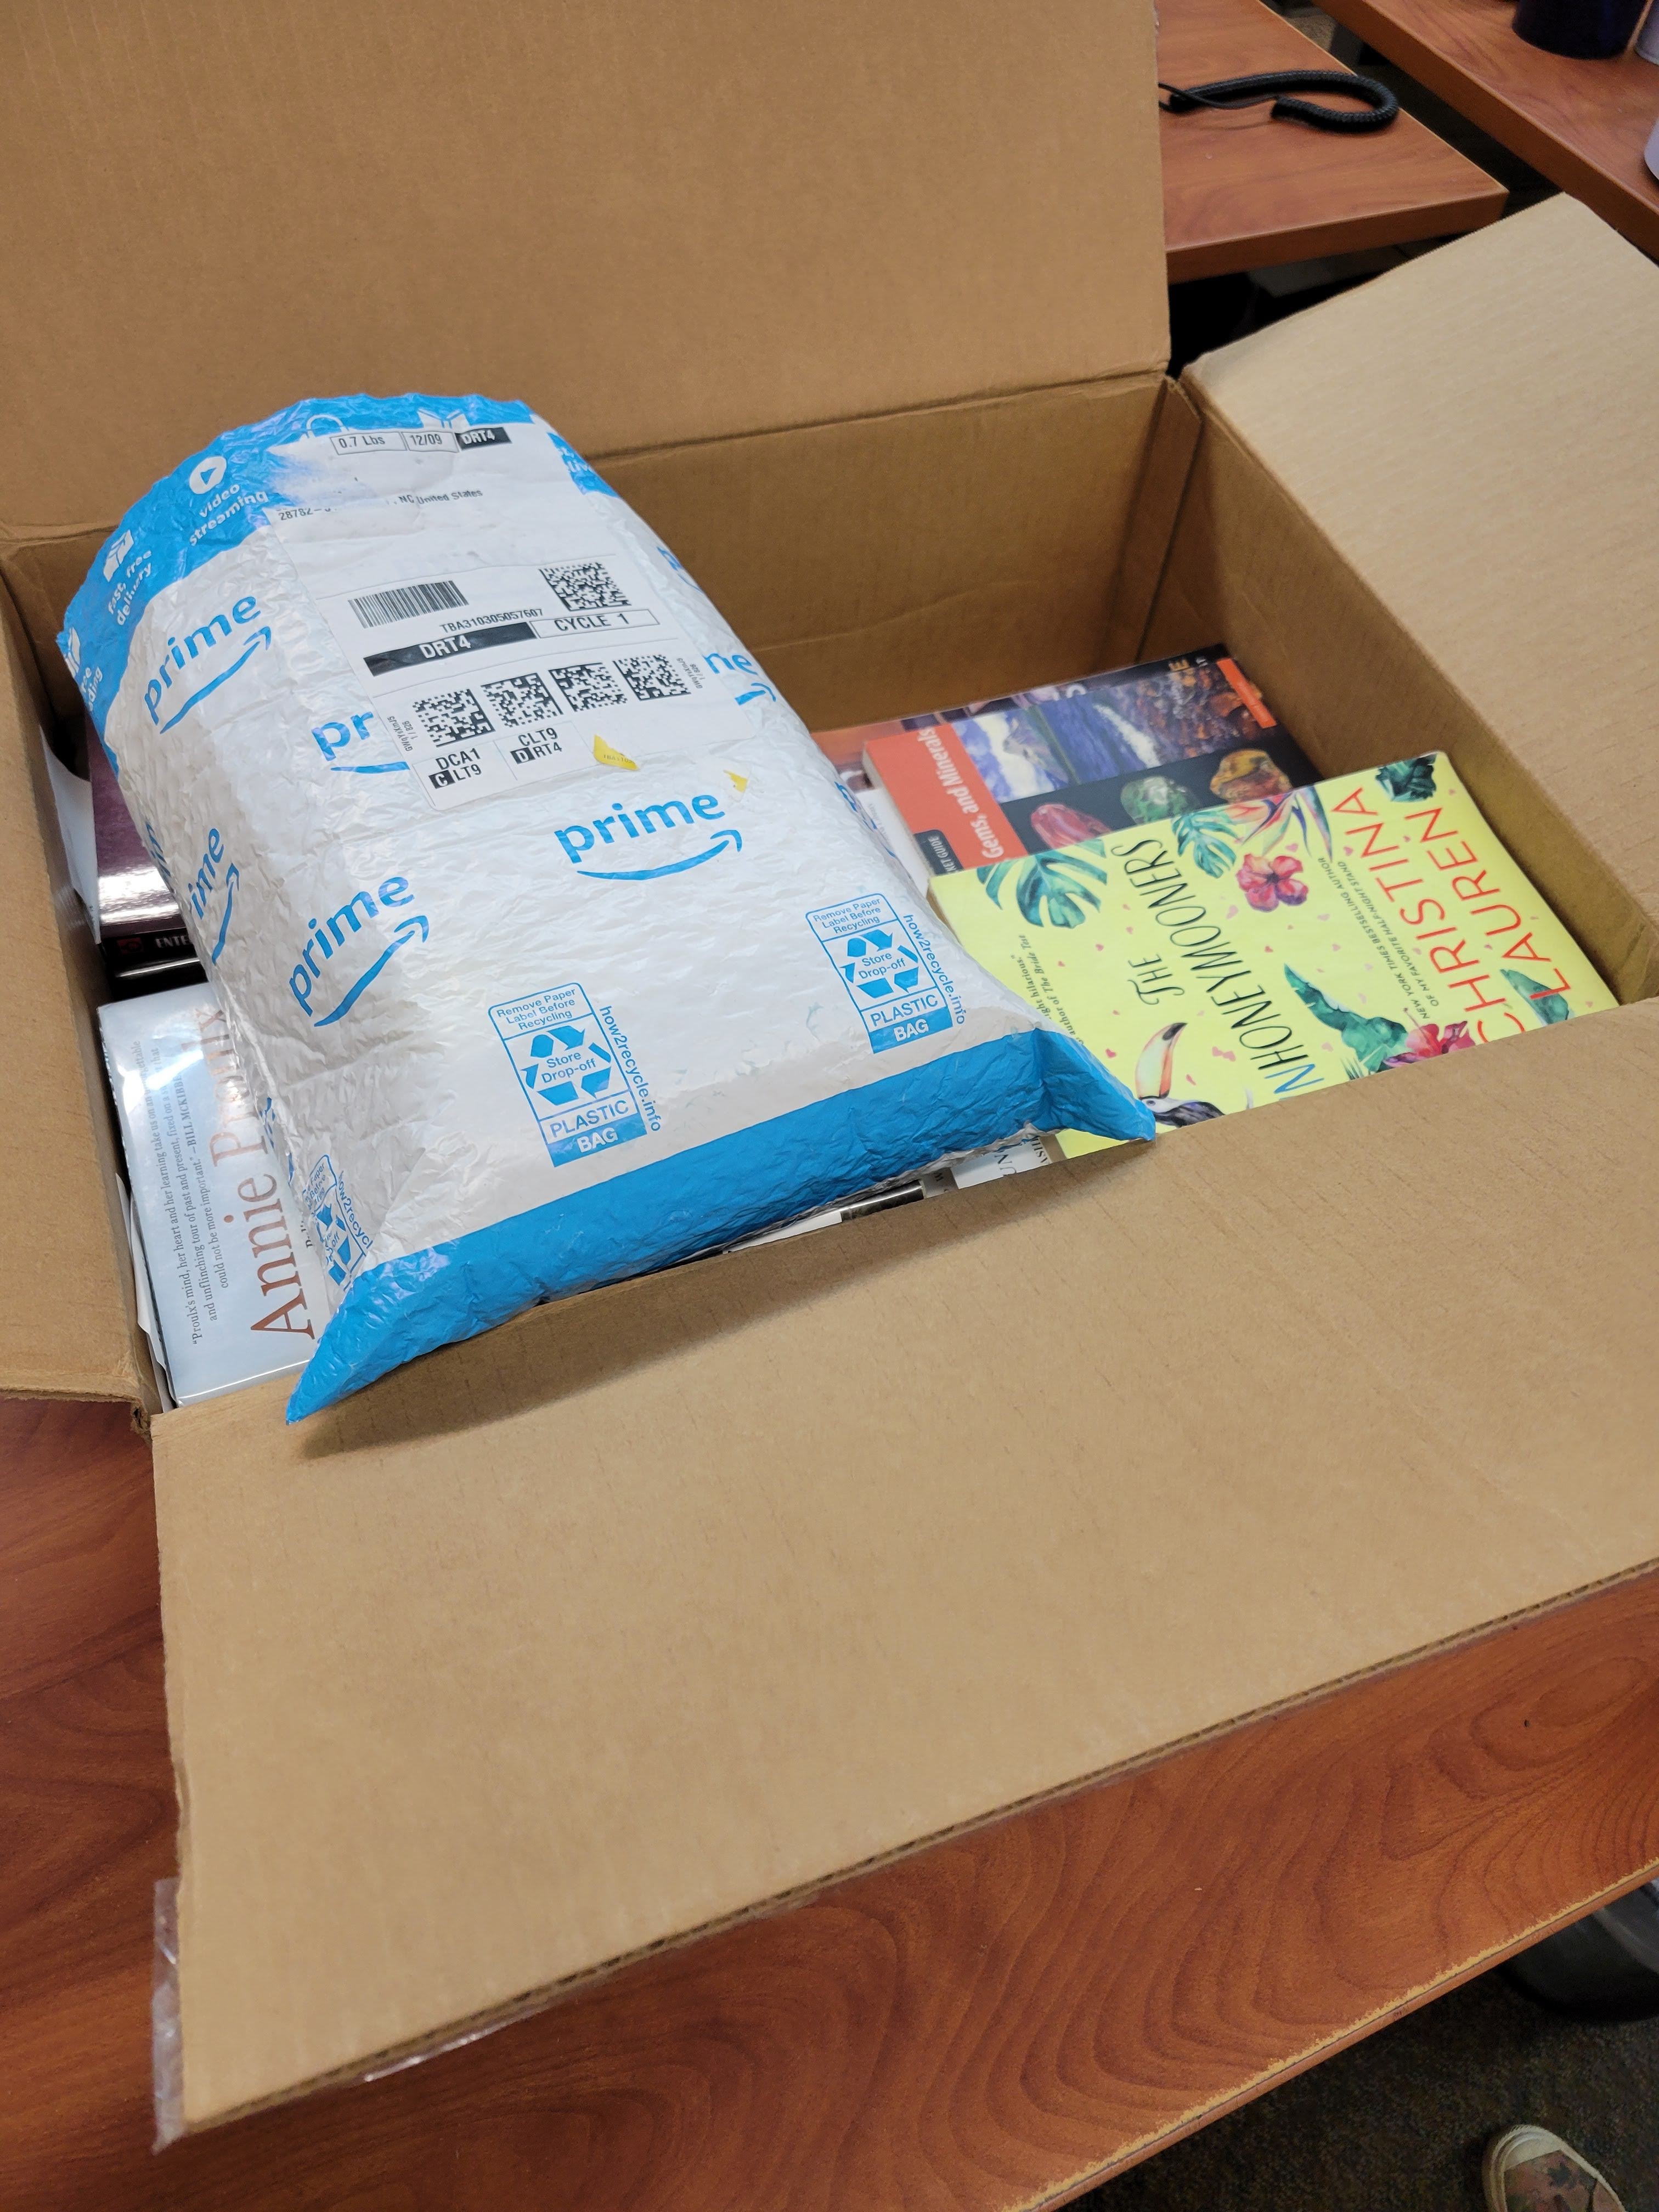 A padded envelope placed on top of materials in a box to provide cushioning.